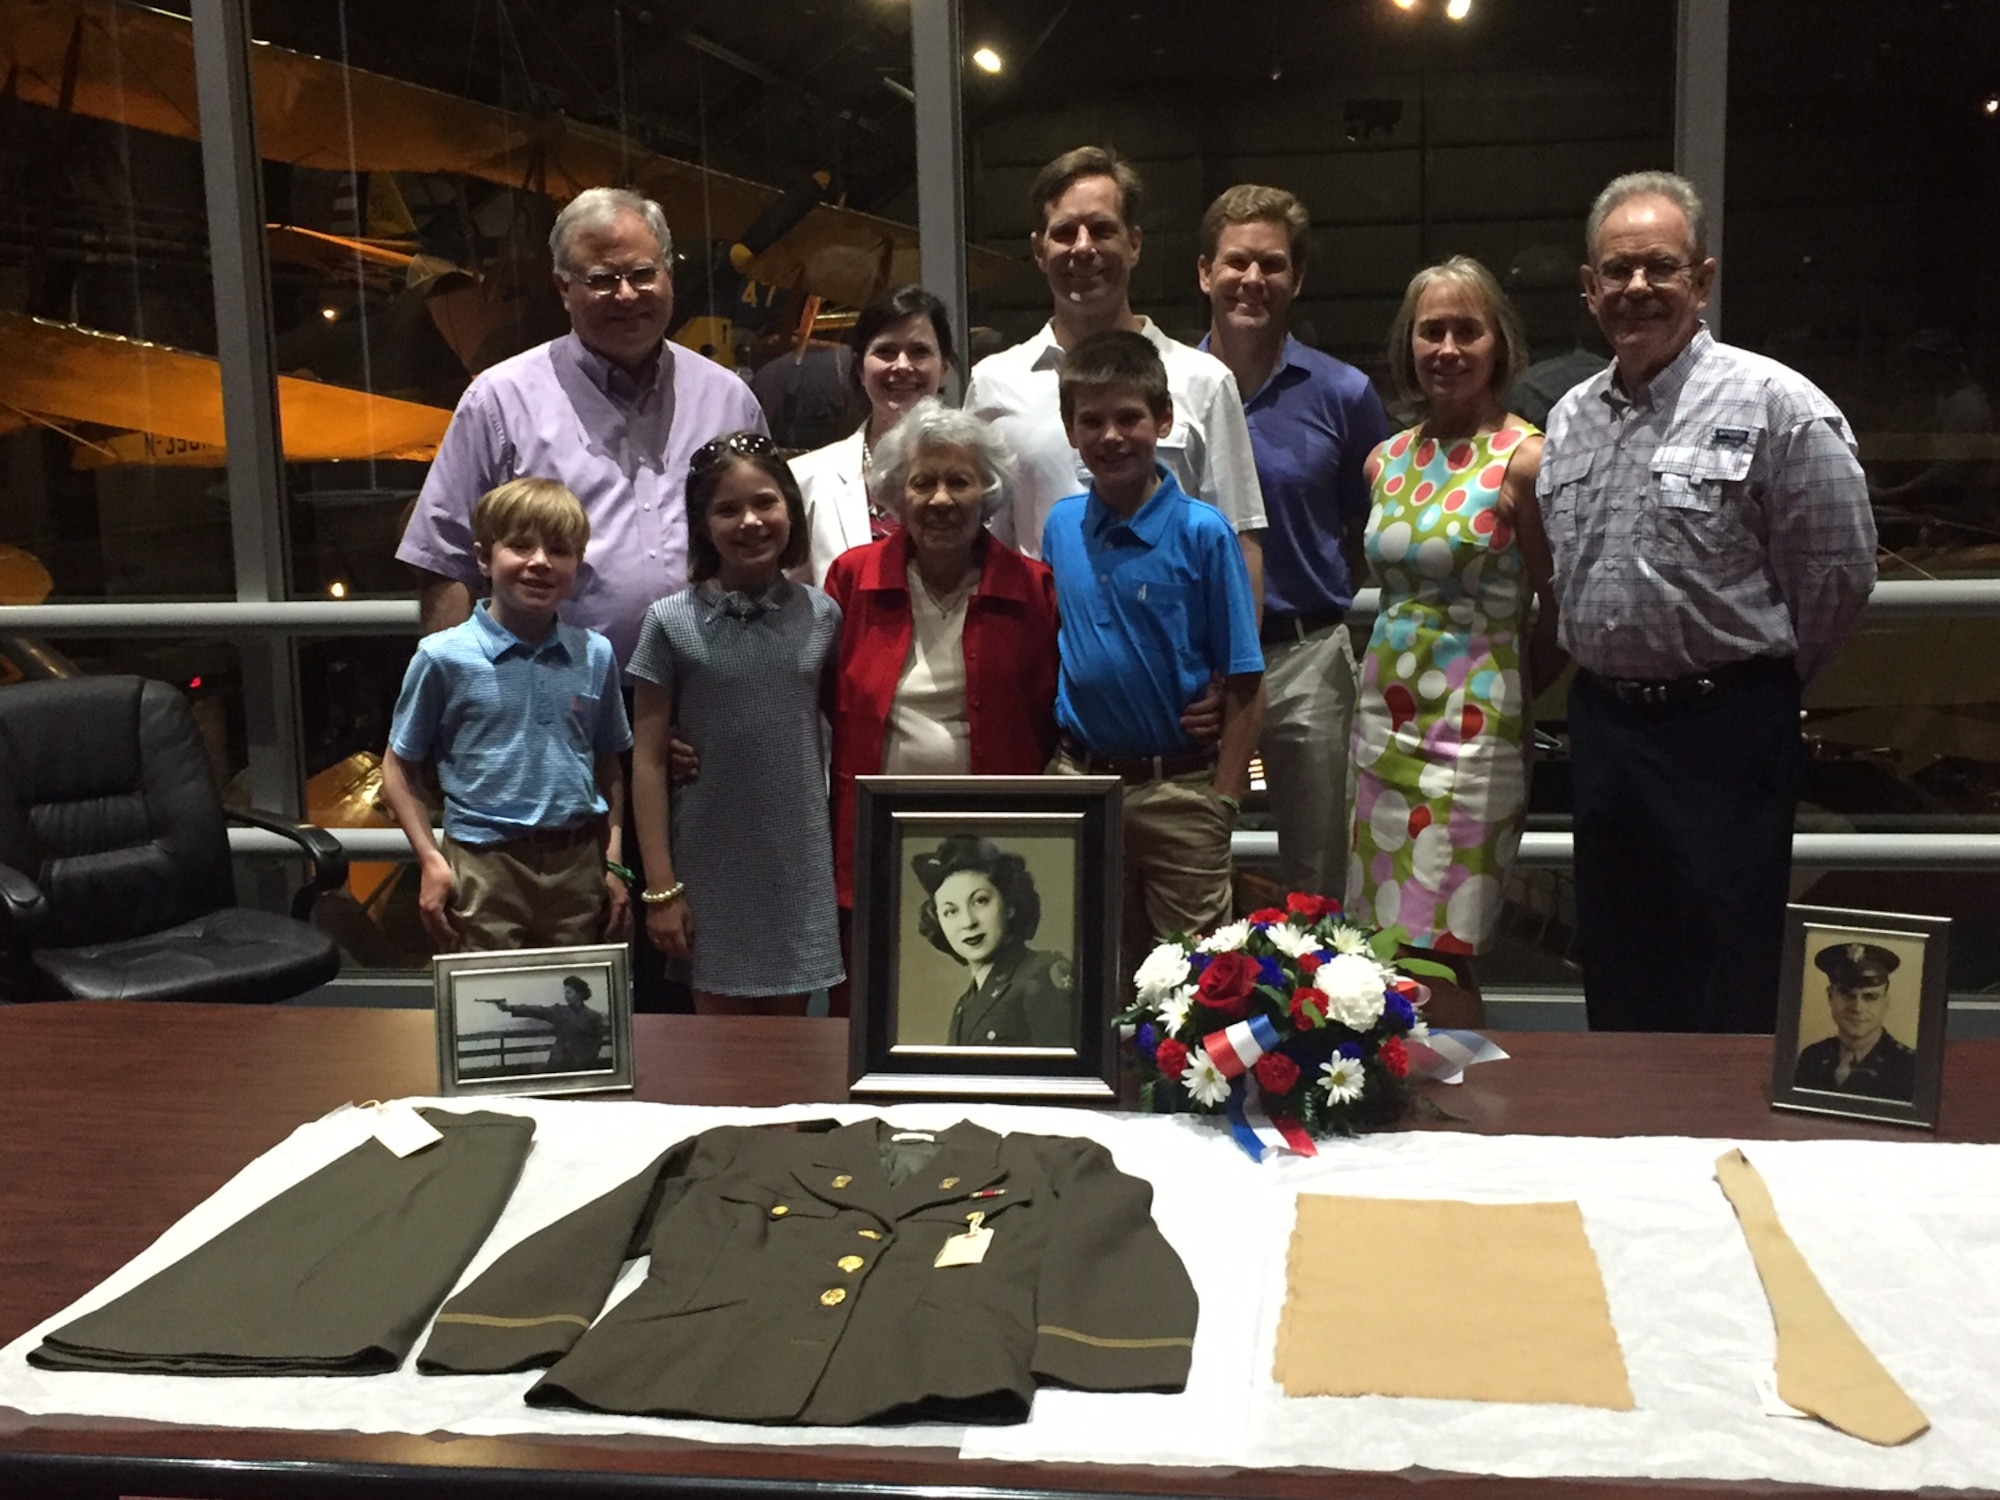 Yolanda ‘Tipi’ Minnehan stands with two of her three children, some of their children and some of her great-grandchildren July 6 at the National Museum of the U.S. Air Force as they admire her uniform artifacts from the Women’s Army Auxiliary Corps, later the Women’s Army Corps. U.S. Air Force Col. Barney Minnehan, whose final active-duty assignment was at Wright-Patterson AFB, is pictured far right. (Skywrighter photo/Amy Rollins)